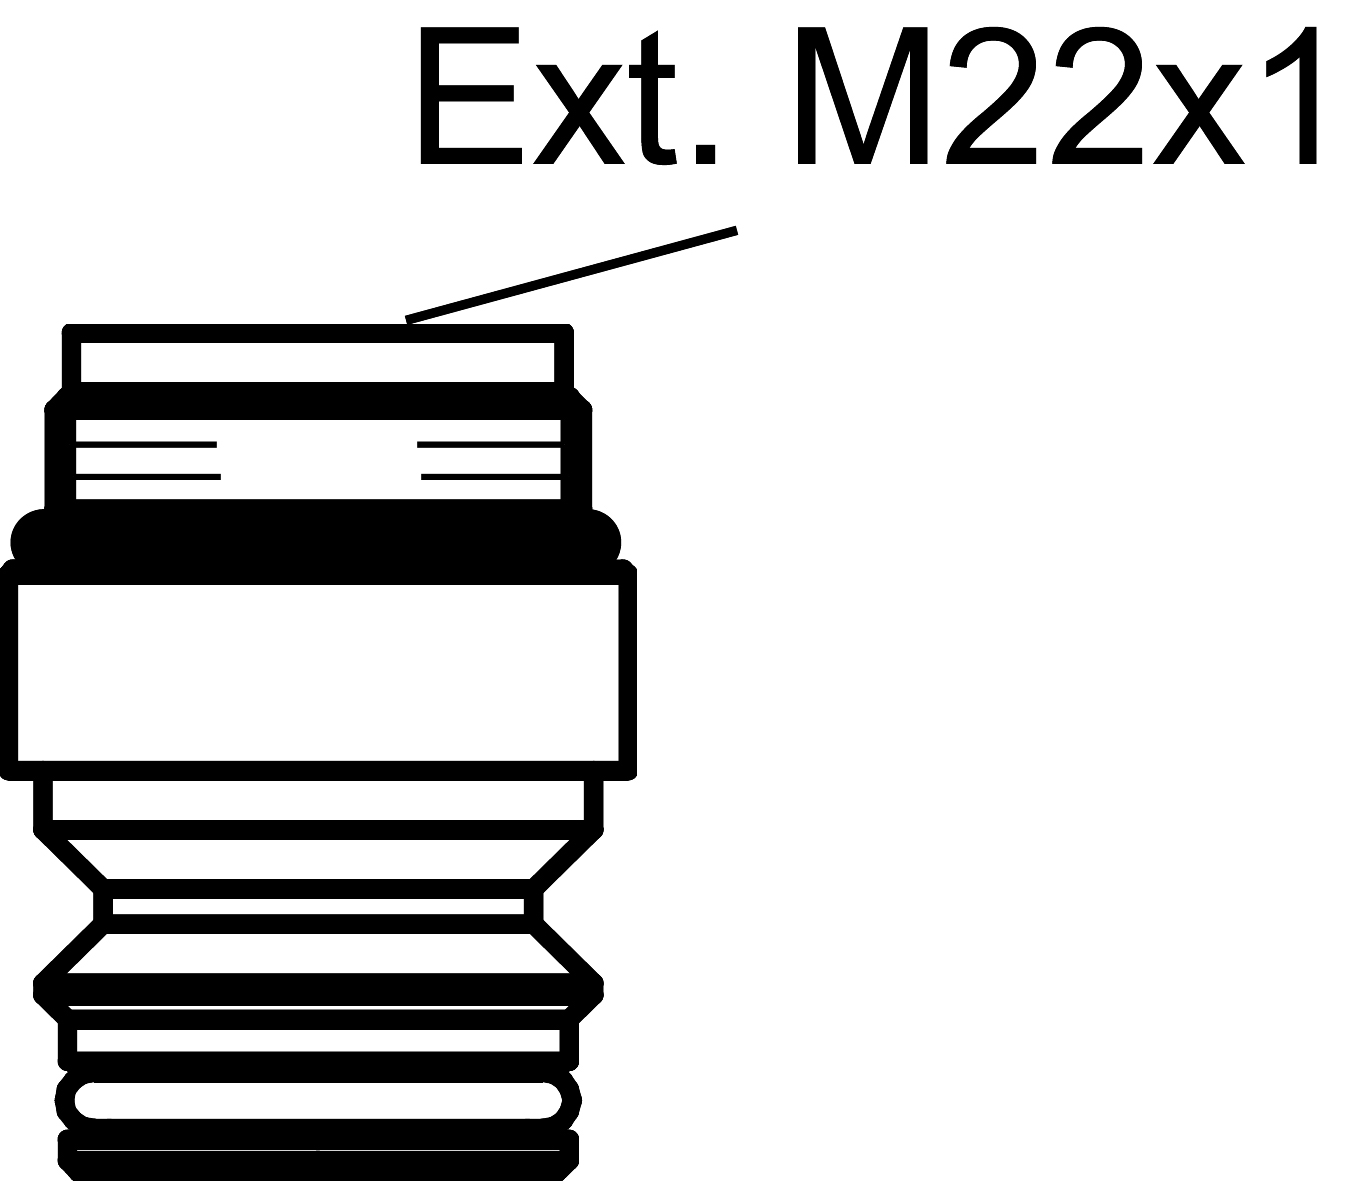 K3975-2000.png